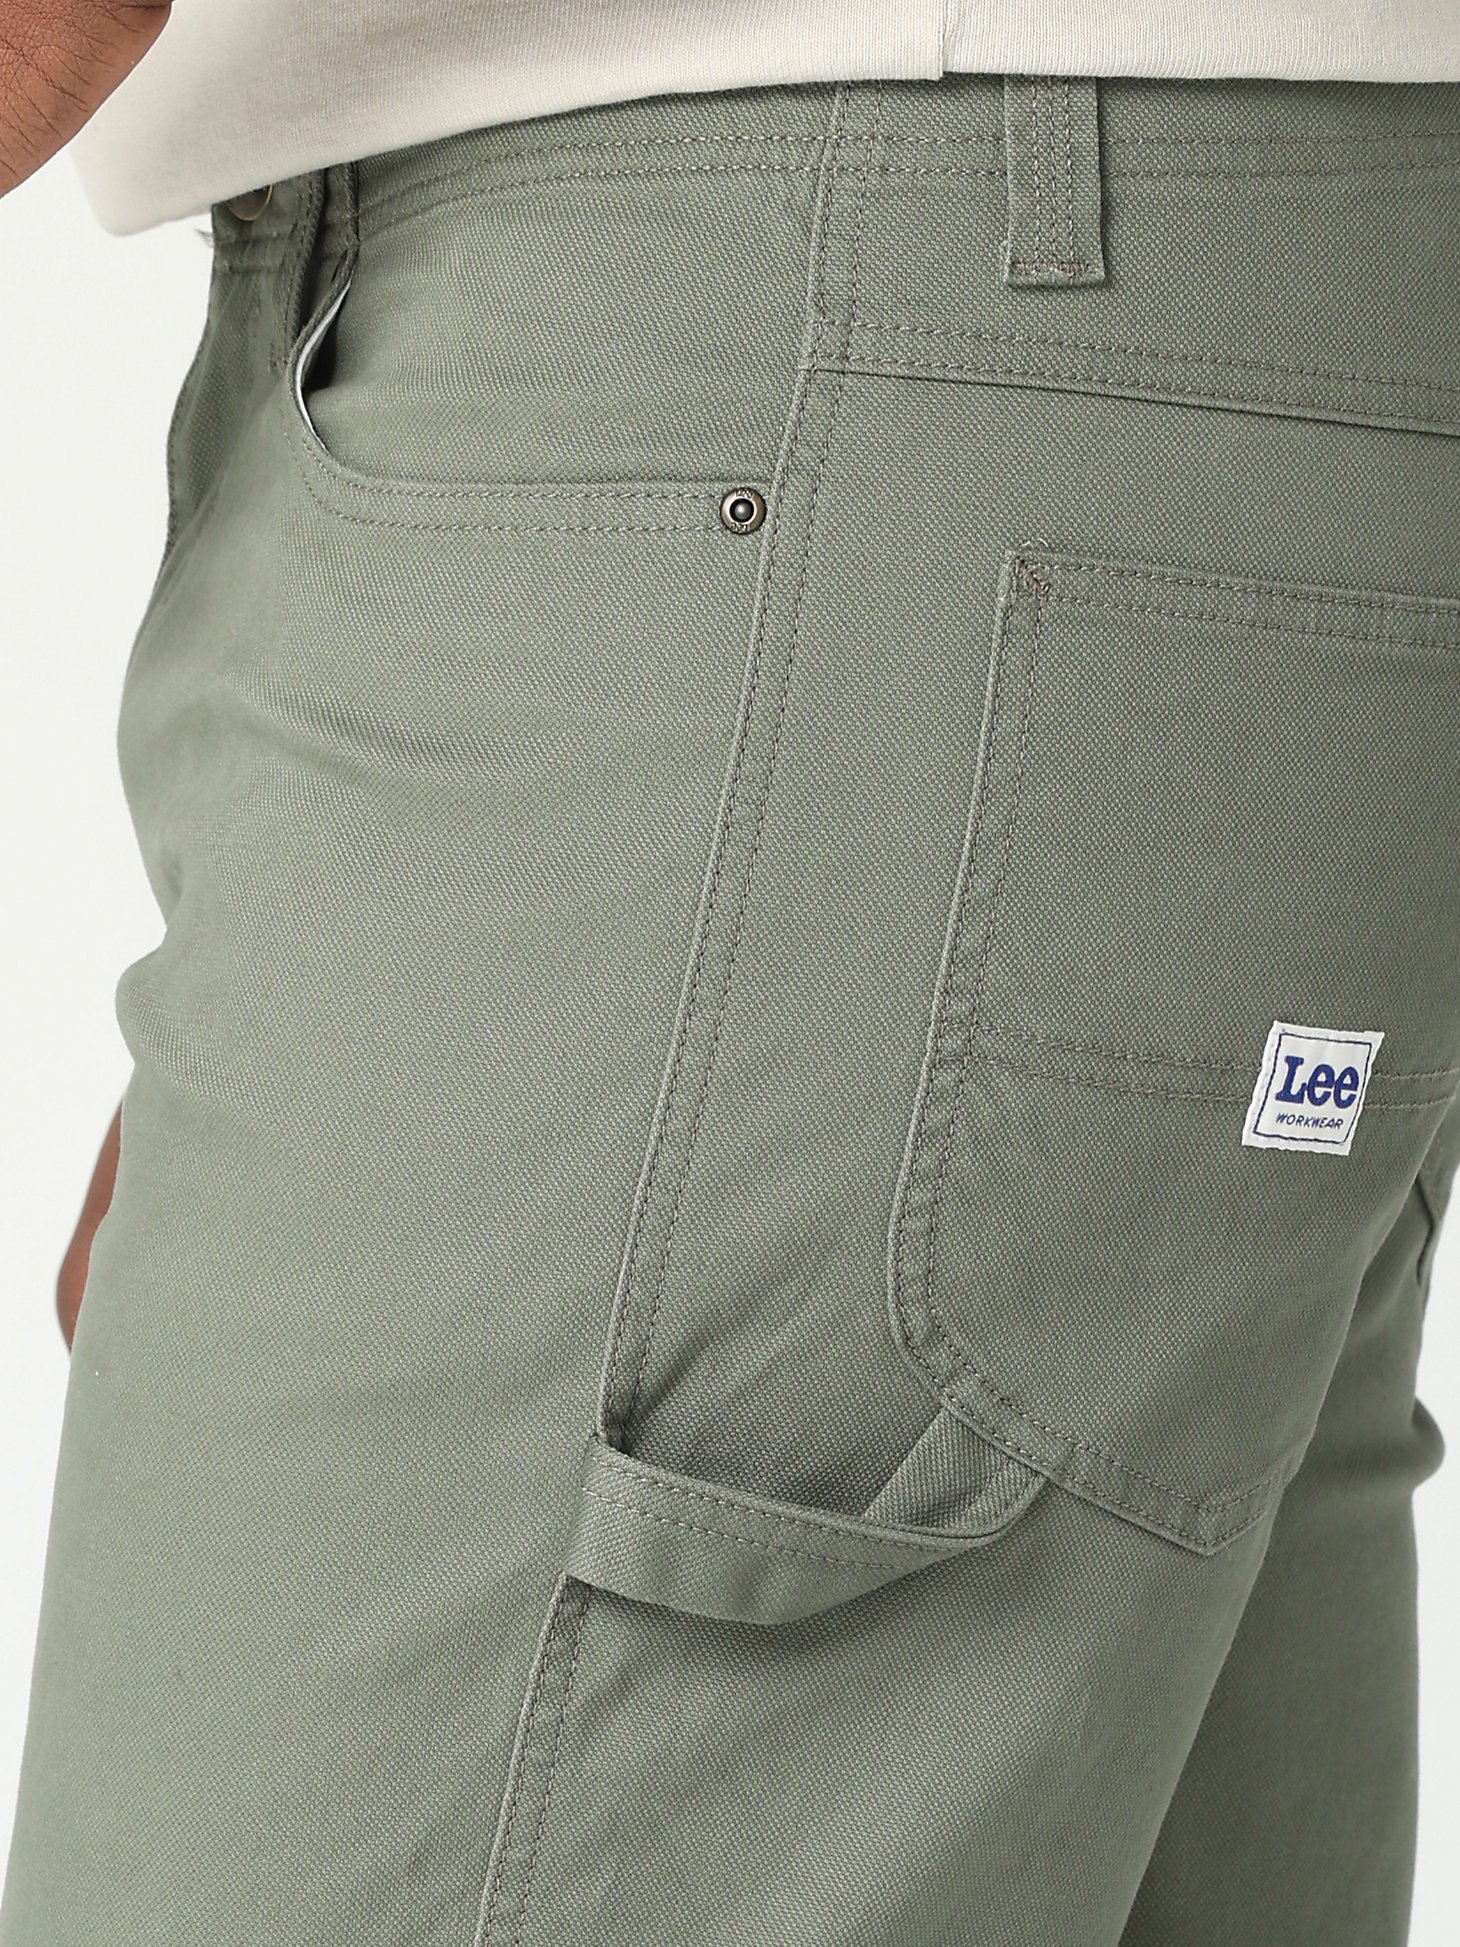 Men's Workwear Relaxed Fit Cargo Pant in Muted Olive alternative view 4